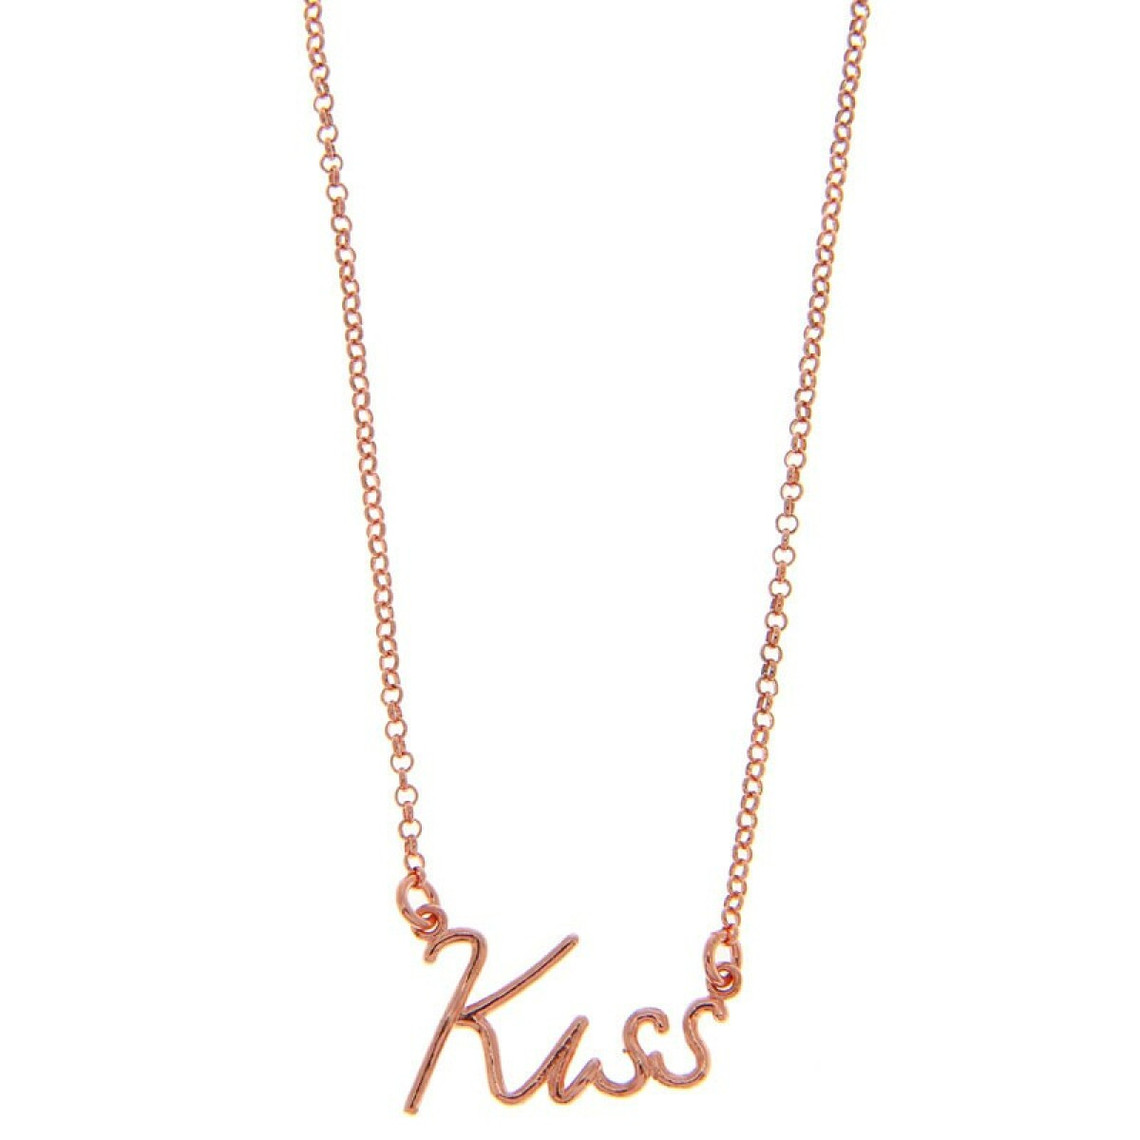 Collier Kiss C9692-Rose Or rose Canyon Mode femme